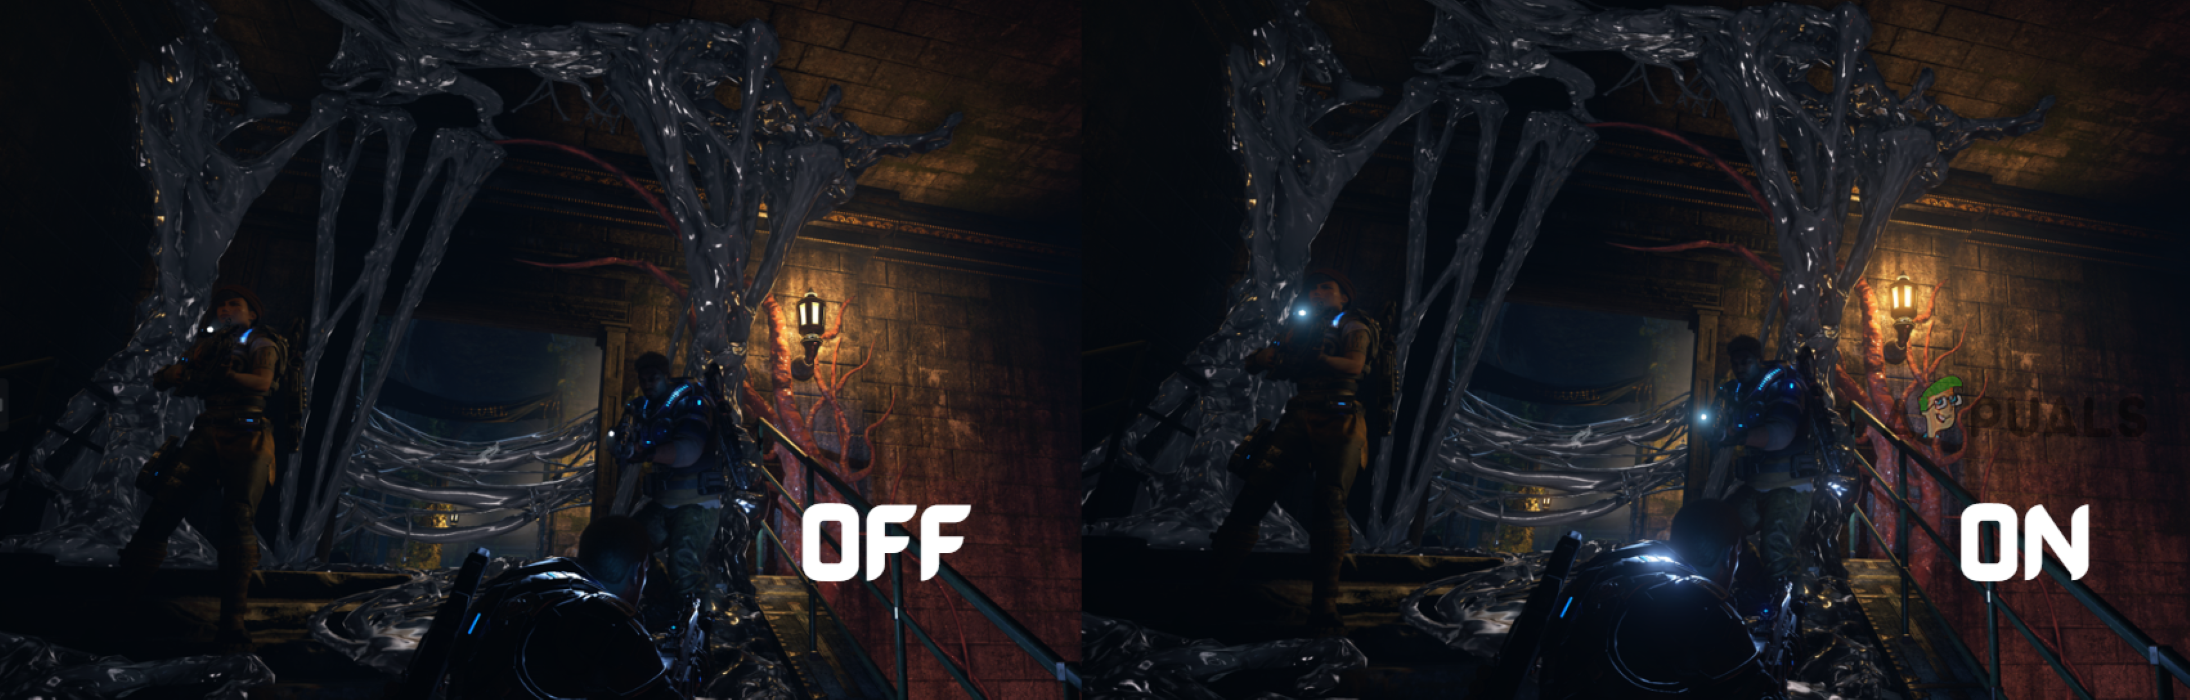 Gears of War with Bloom ON and OFF